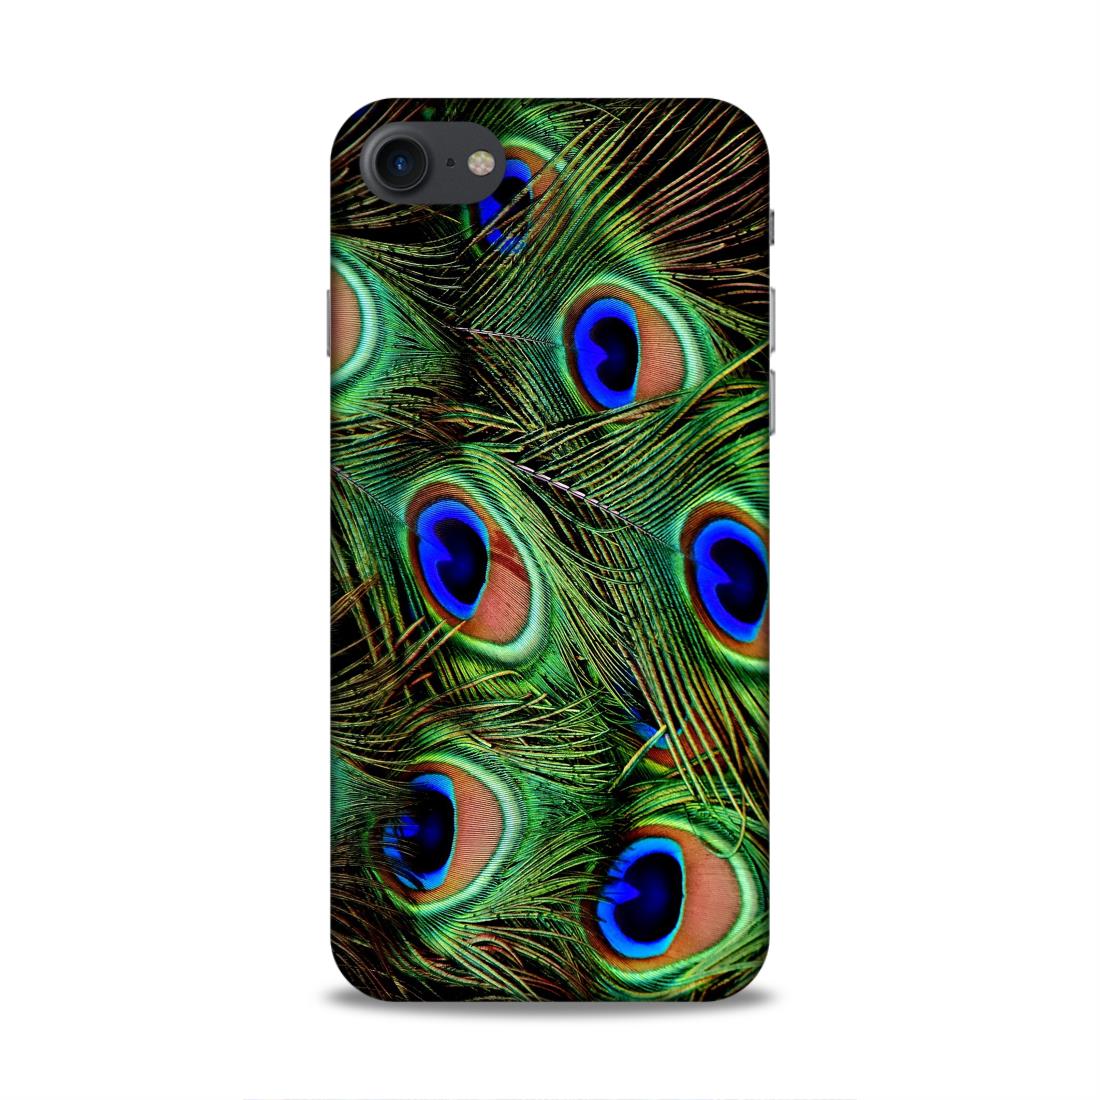 Peacock Feather Hard Back Case For Apple iPhone 7 / 8 / SE 2020